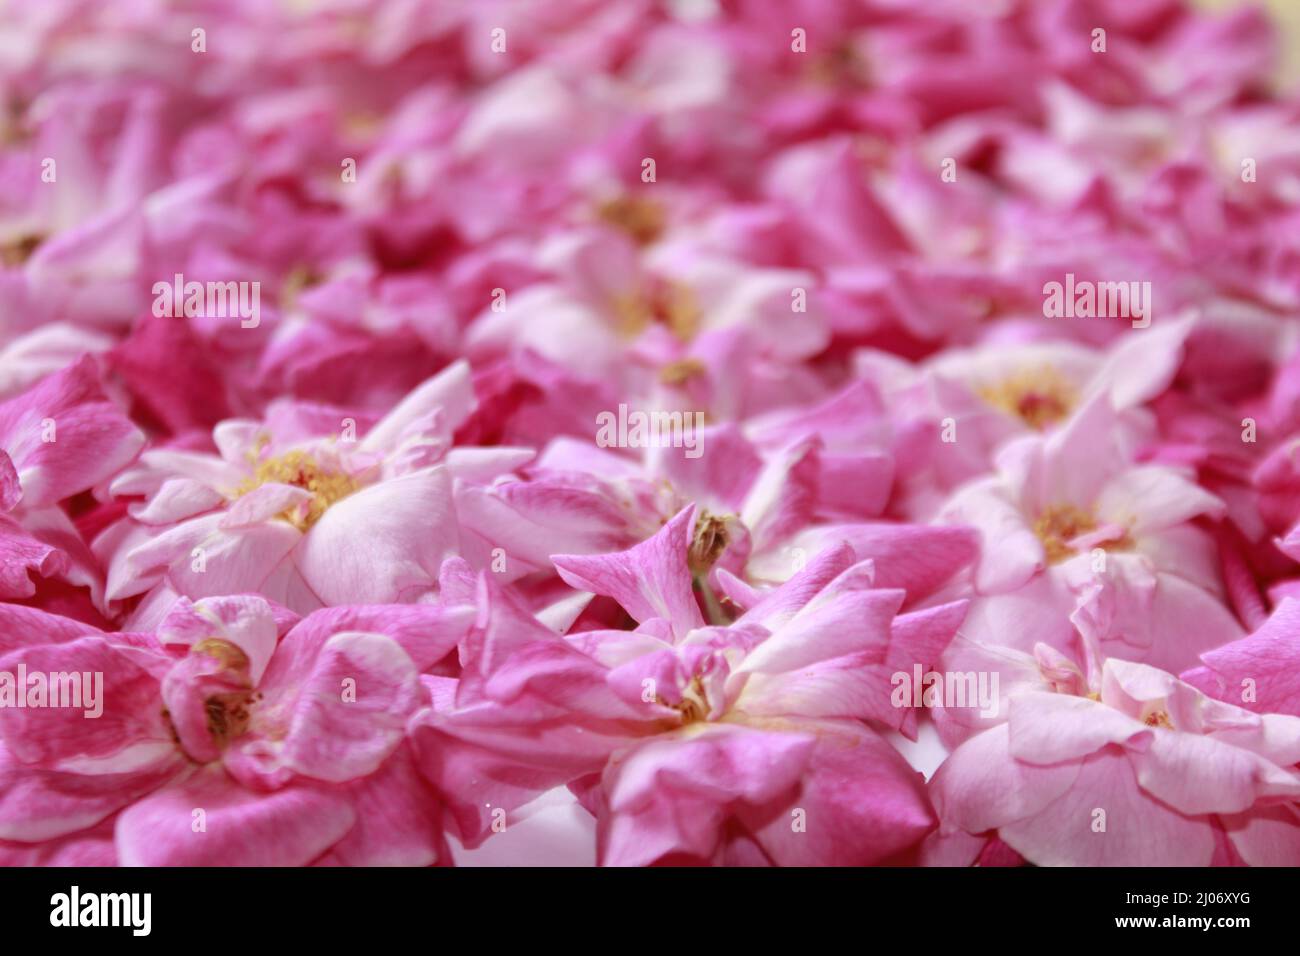 Isolated, close-up of a pink rose petals background Stock Photo